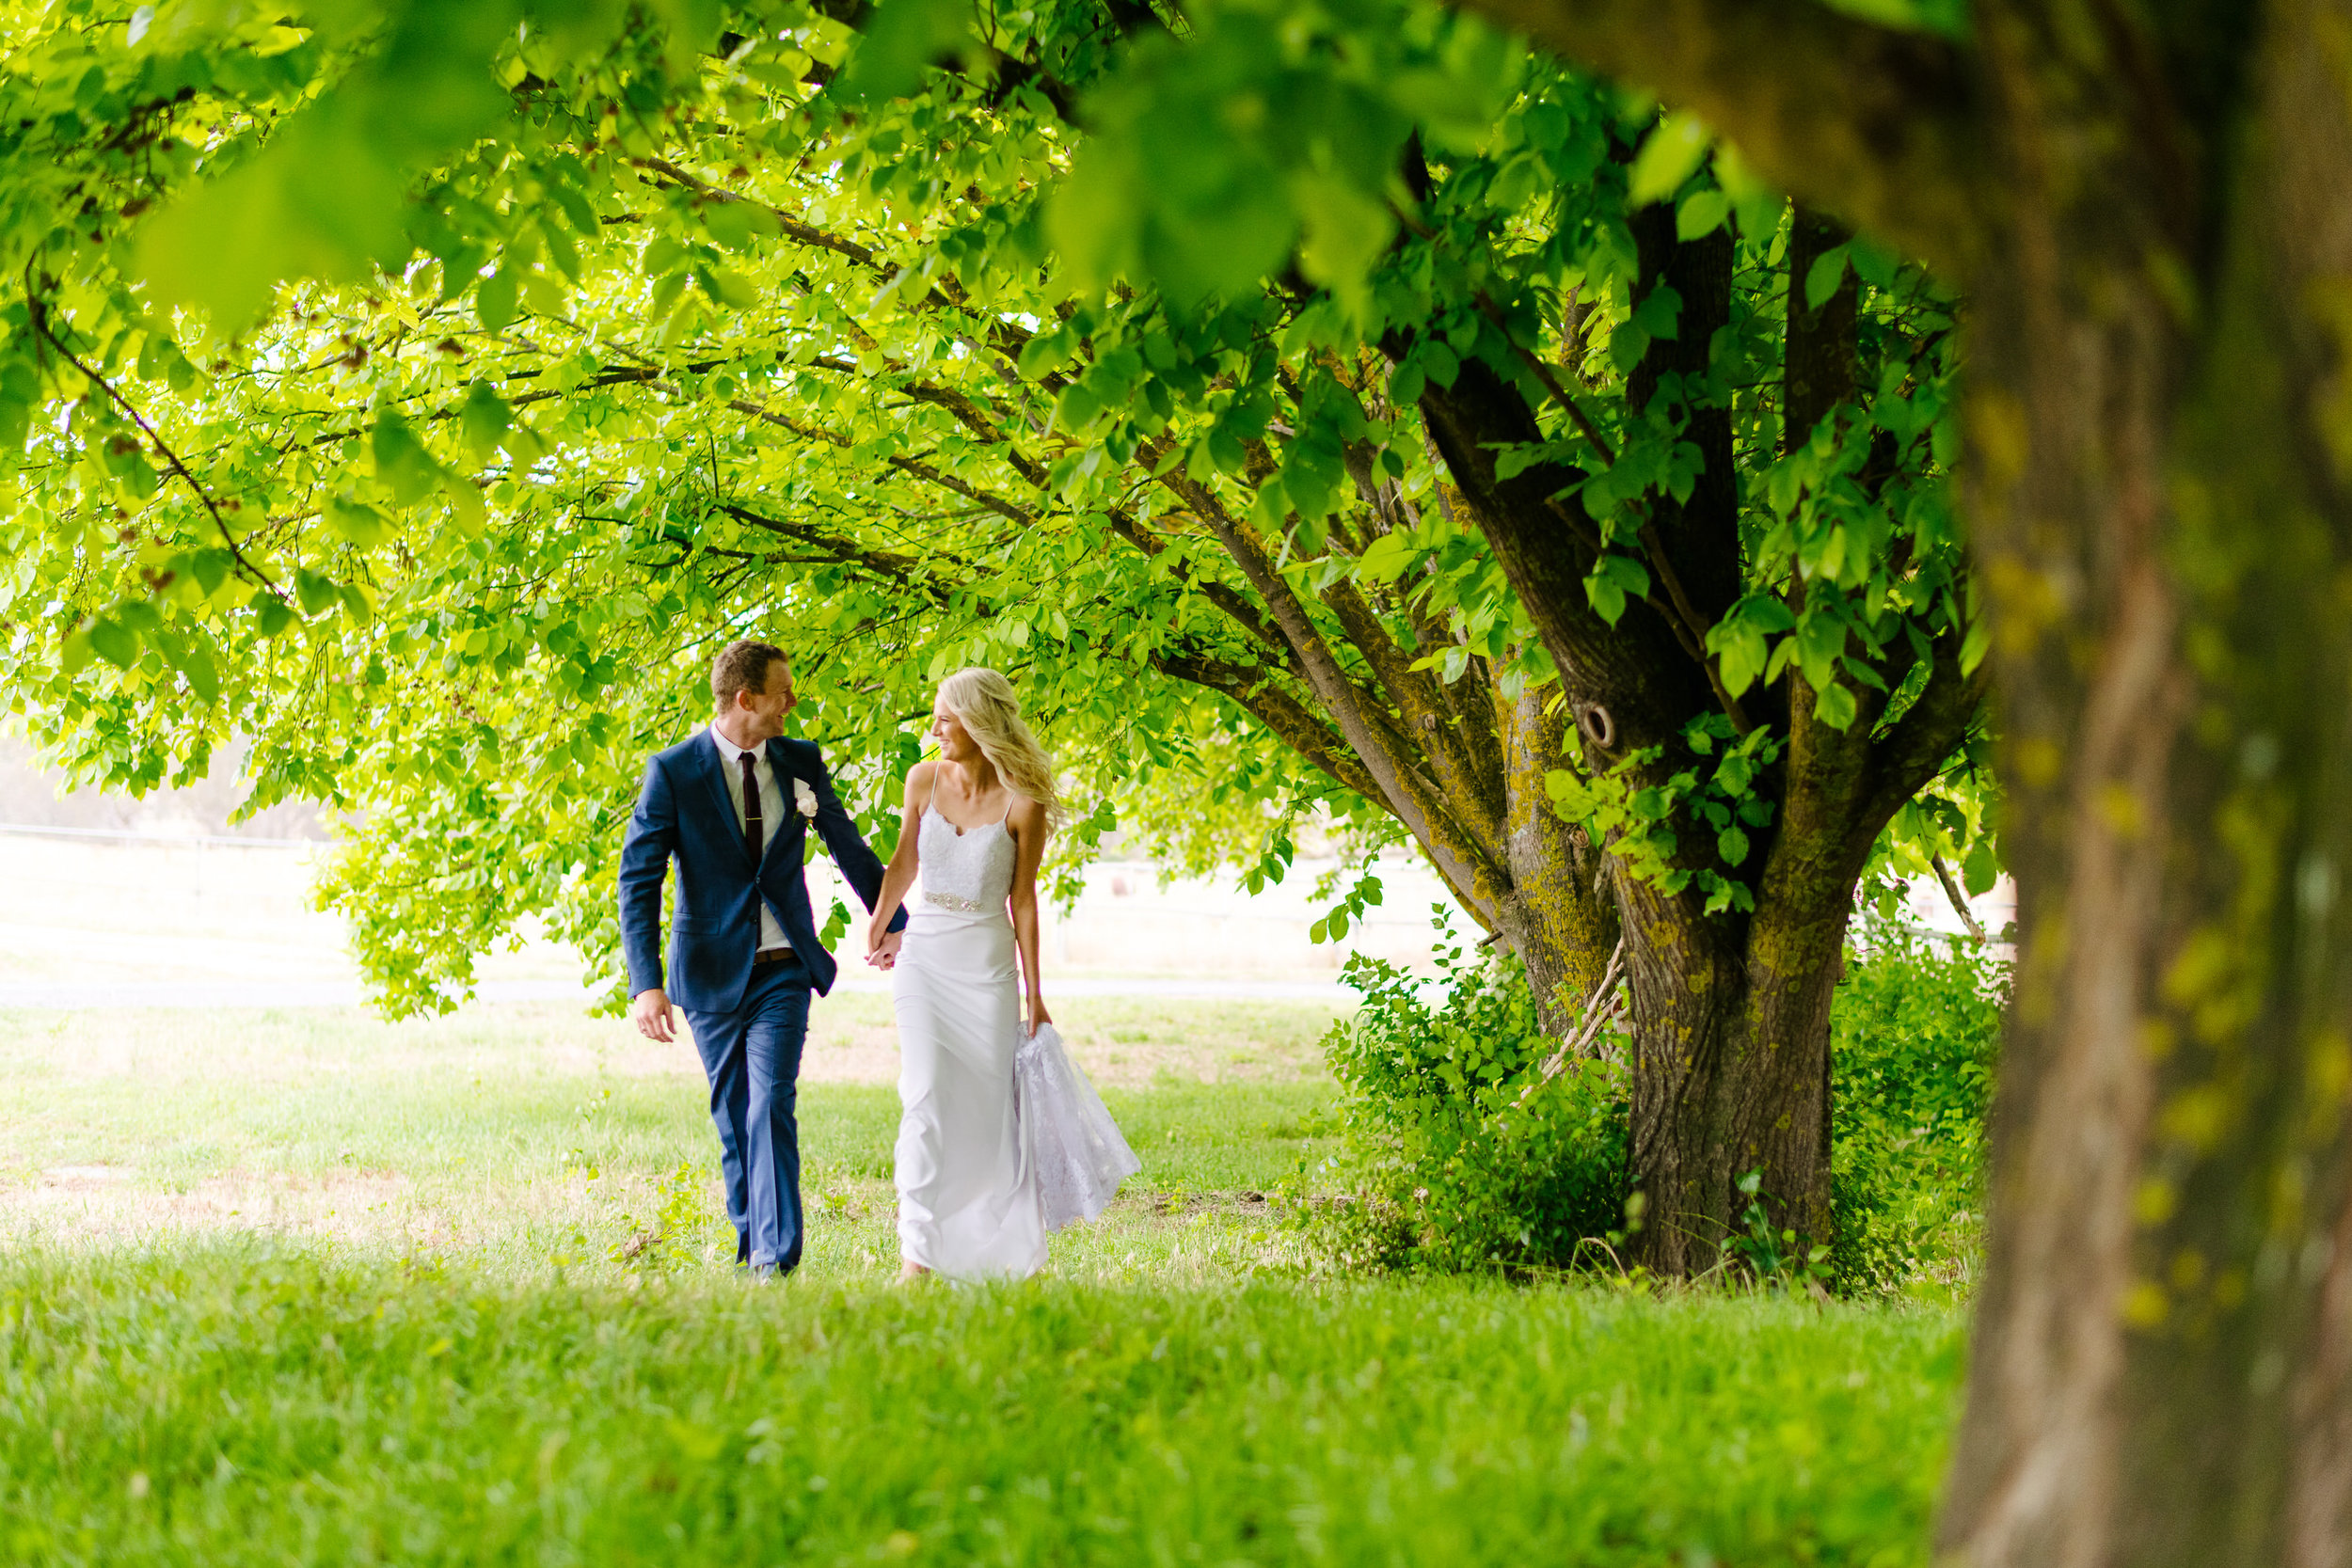 Justin_And_Jim_Photography_Sutton_Grange_Winery83.JPG